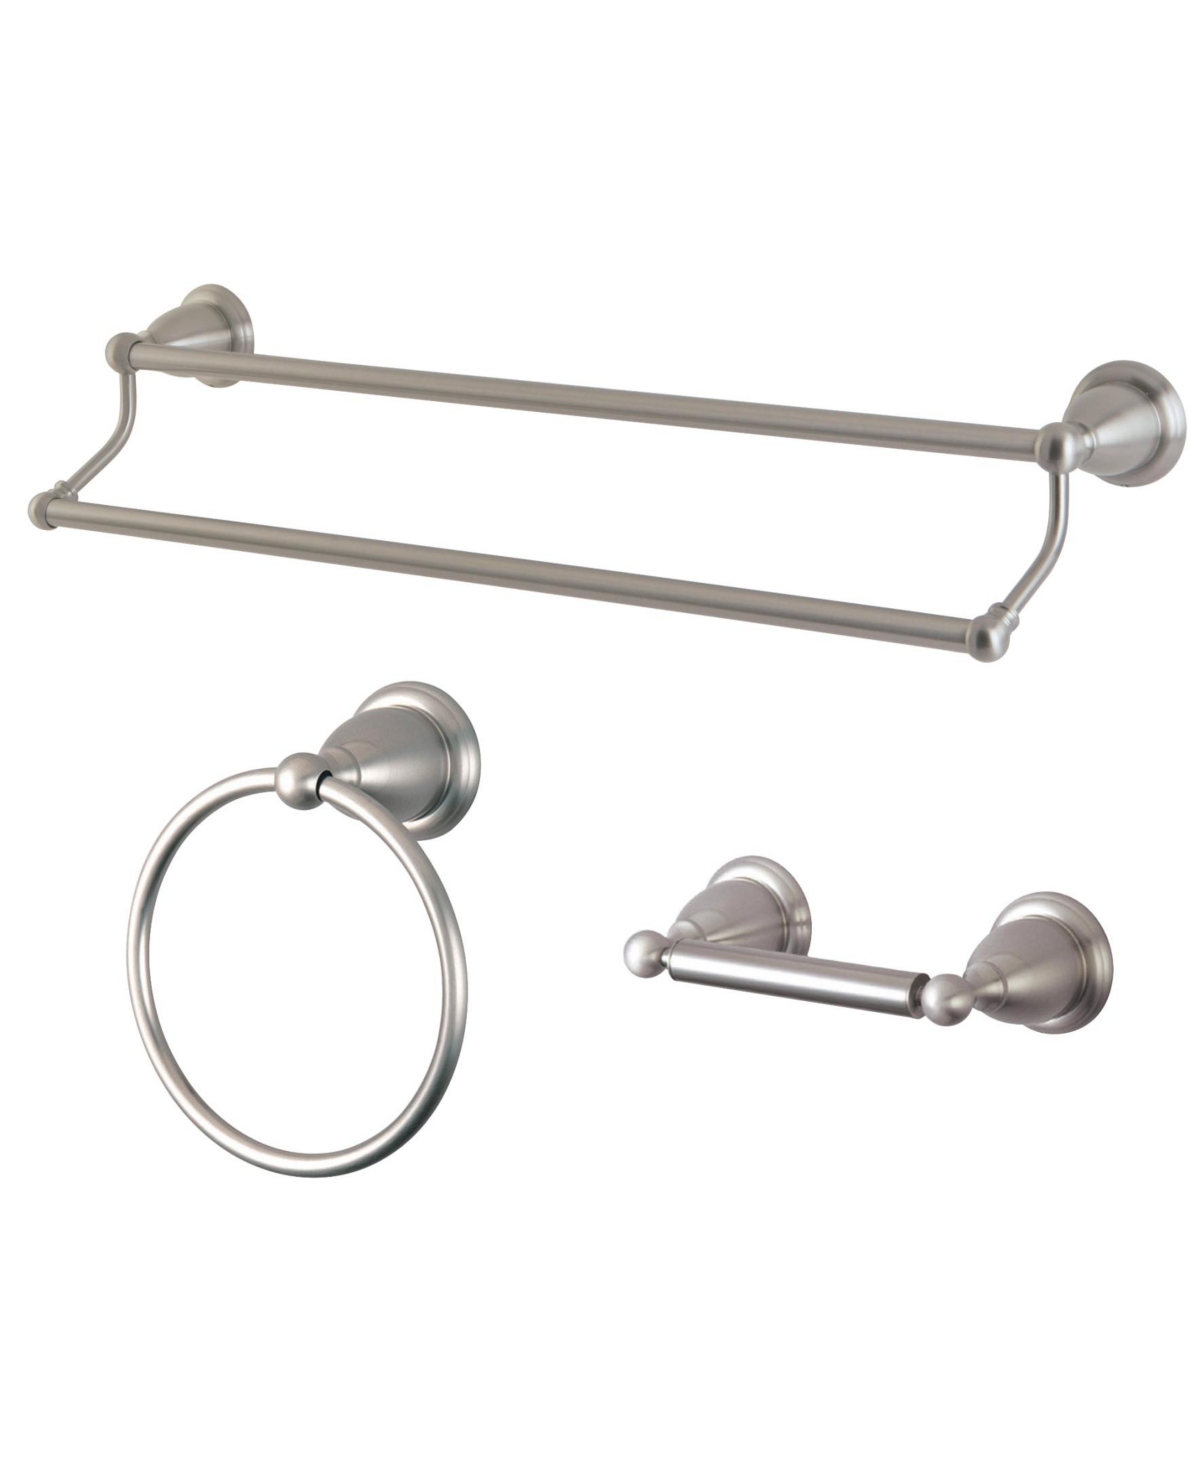 Kingston Brass Heritage 3-Pc. Dual Towel Bar Accessory Set in Brushed Nickel Bedding